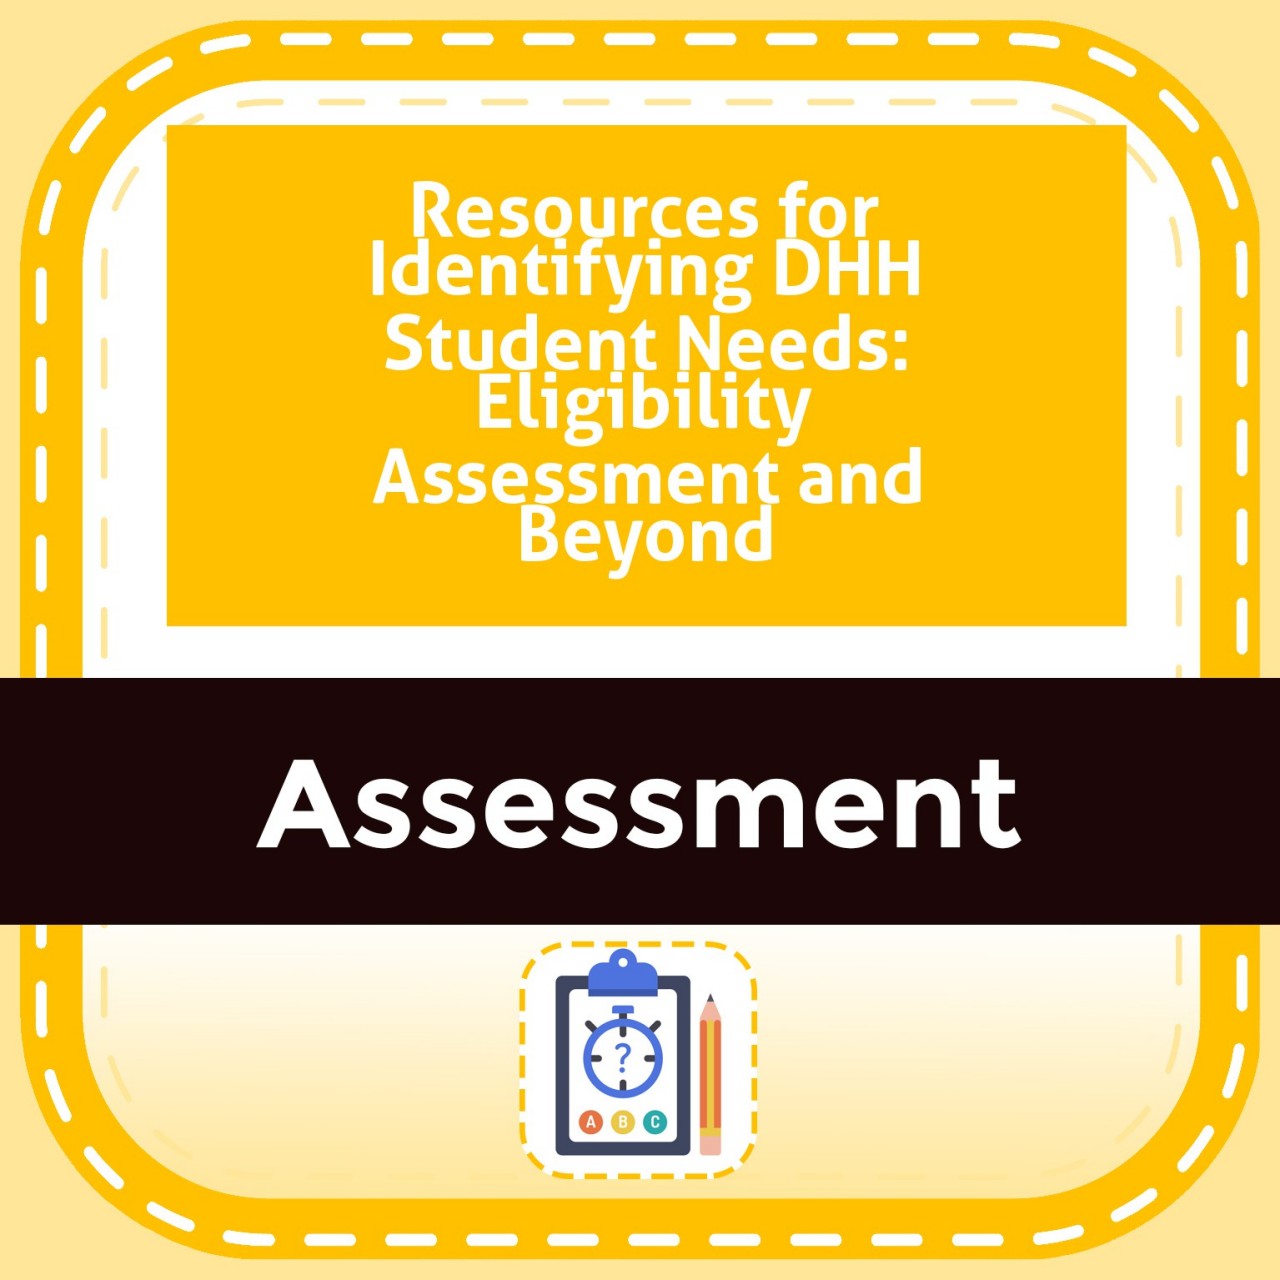 Resources for Identifying DHH Student Needs: Eligibility Assessment and Beyond